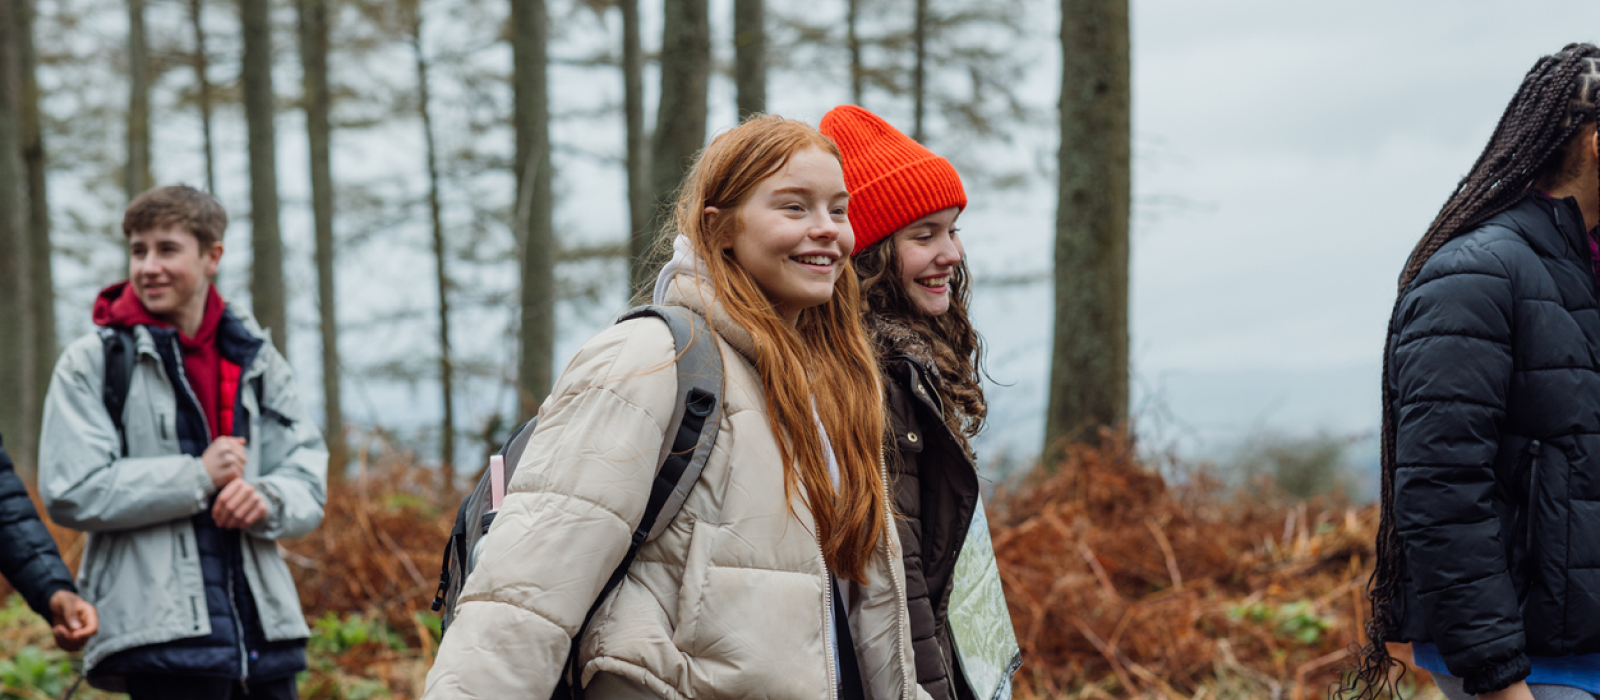 A young teen has been managing her hyperfixation and focusing in a healthier way. She is on a hike with friends to stay social and focus on her physical and mental health.